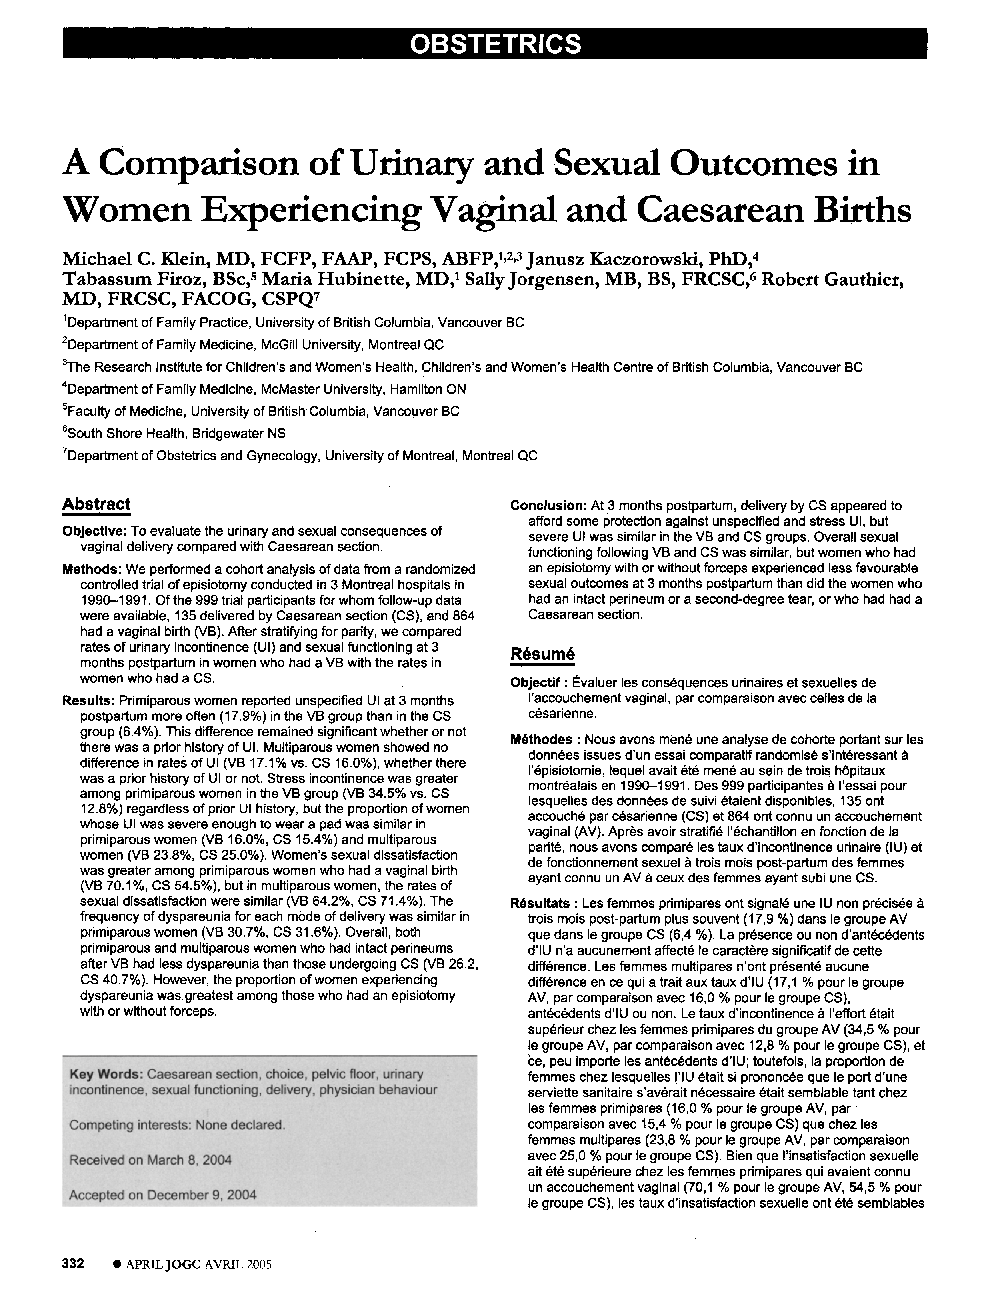 A Comparison of Urinary and Sexual Outcomes in Women Experiencing Vaginal and Caesarean Births